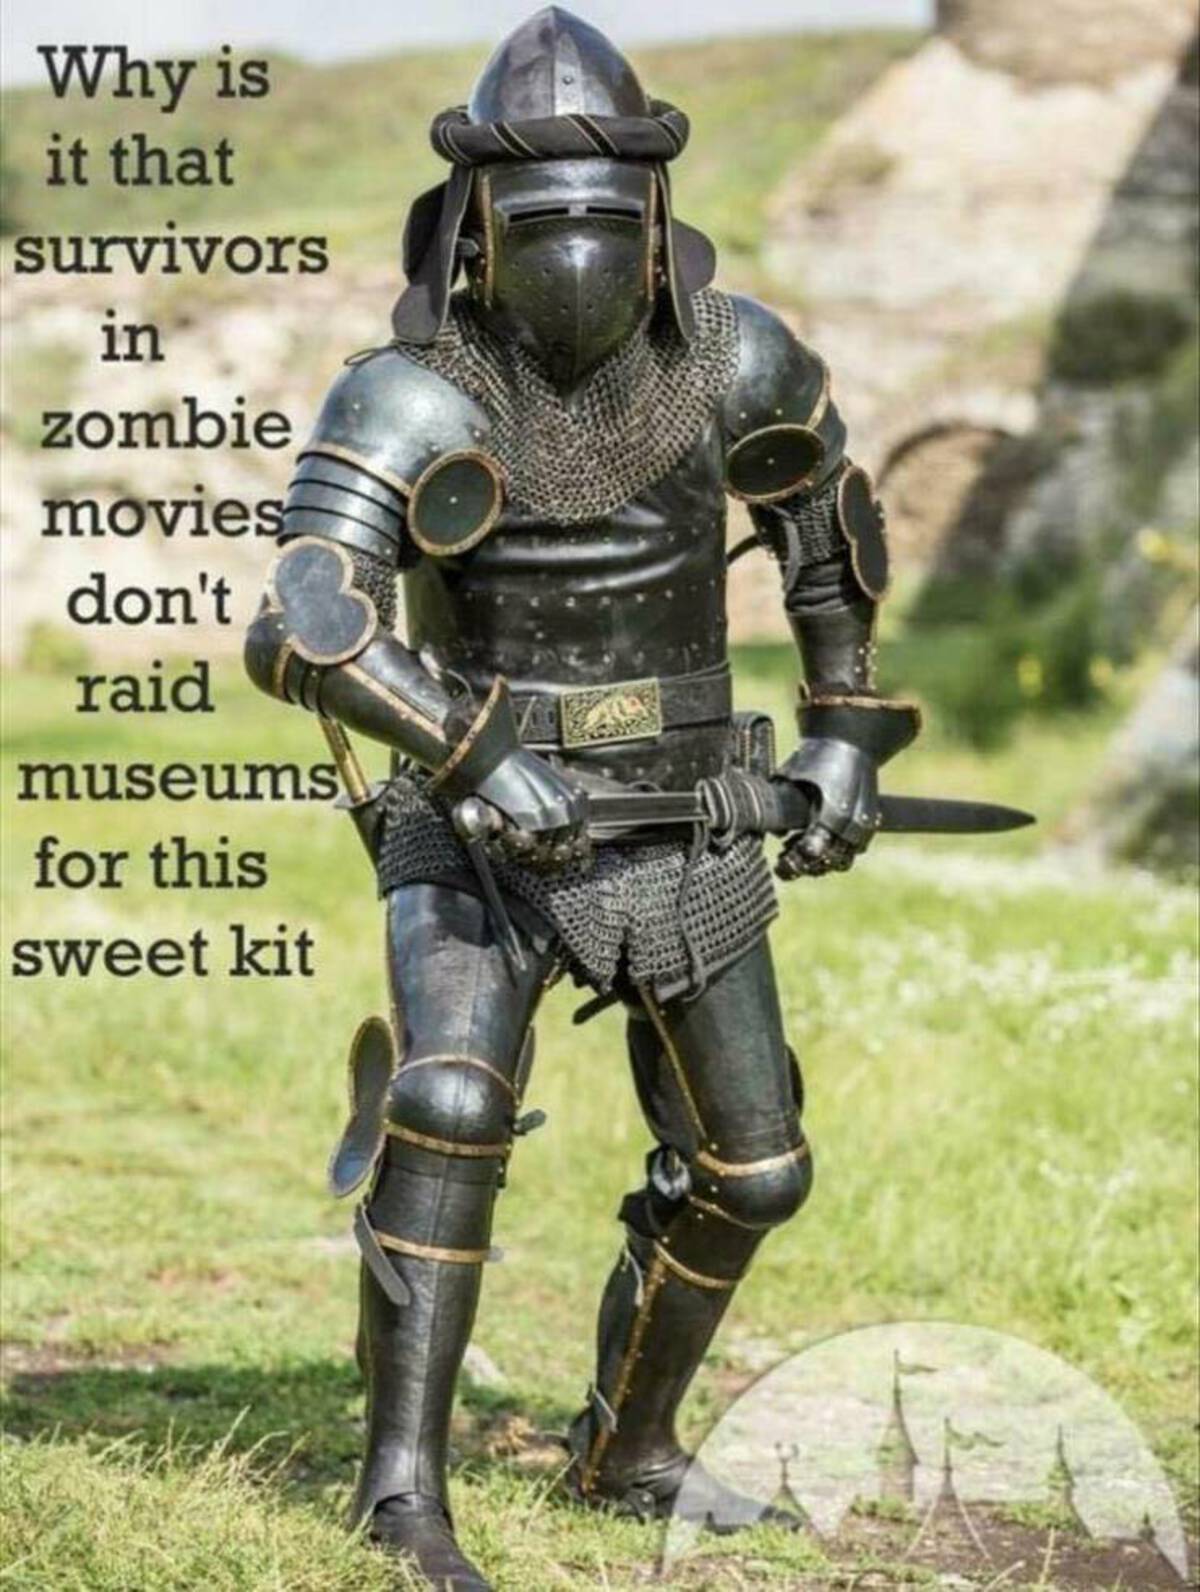 knight armor - Why is it that survivors in zombie movies don't raid museums for this sweet kit